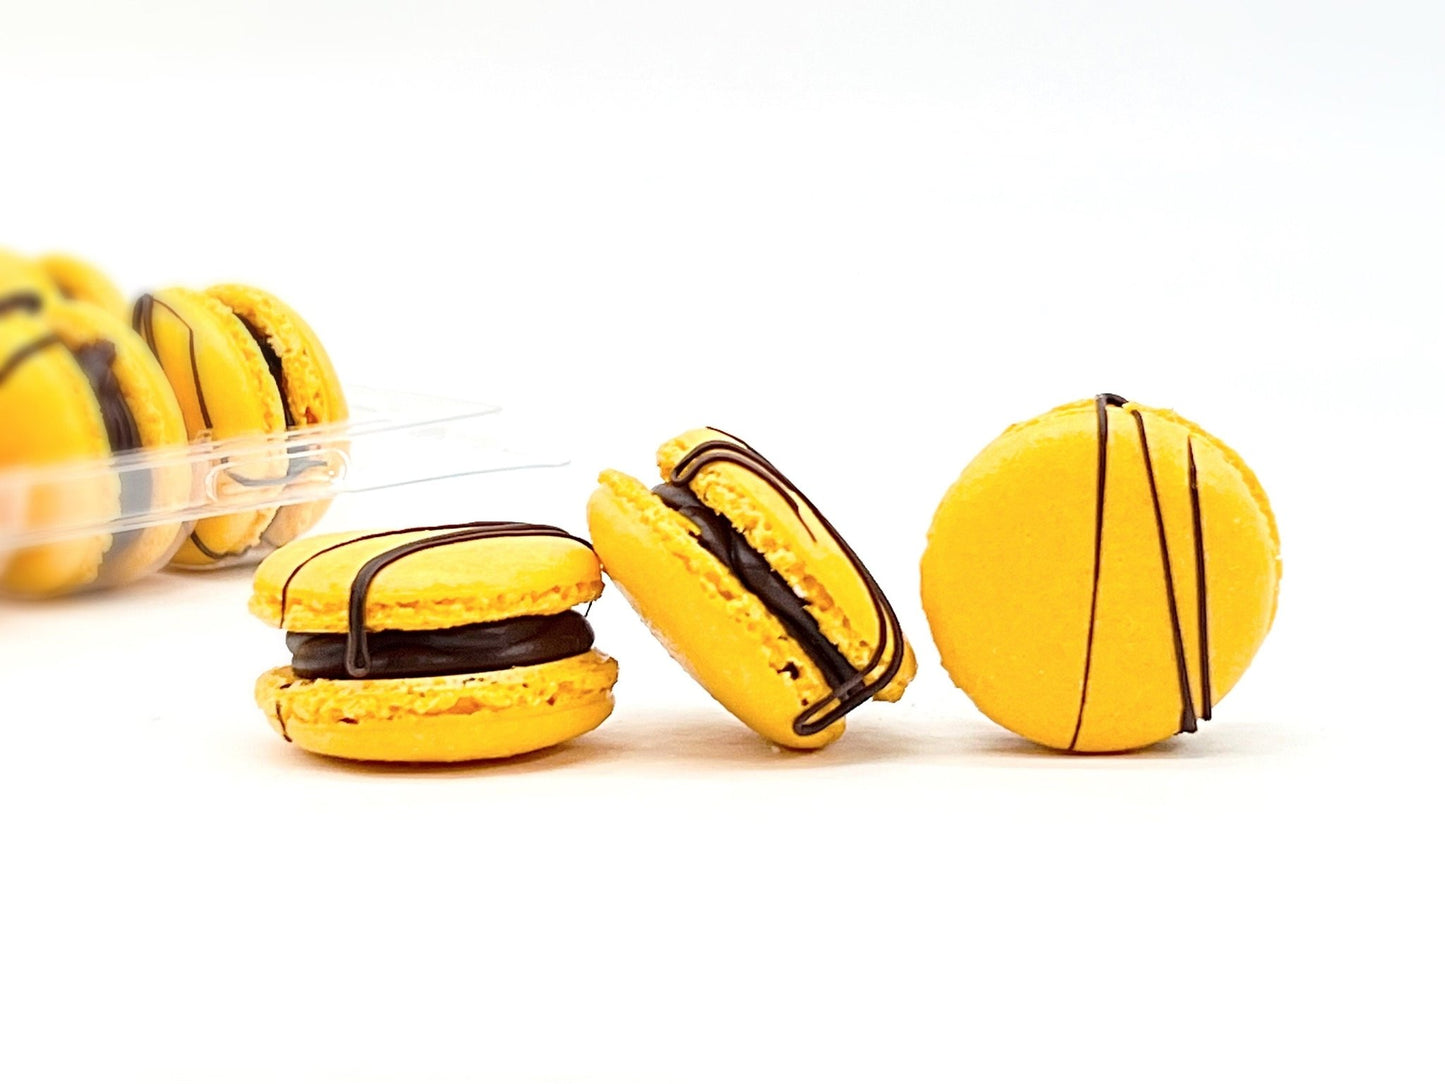 6 Pack Chocolate Marmalade French Macarons - Macaron Centrale